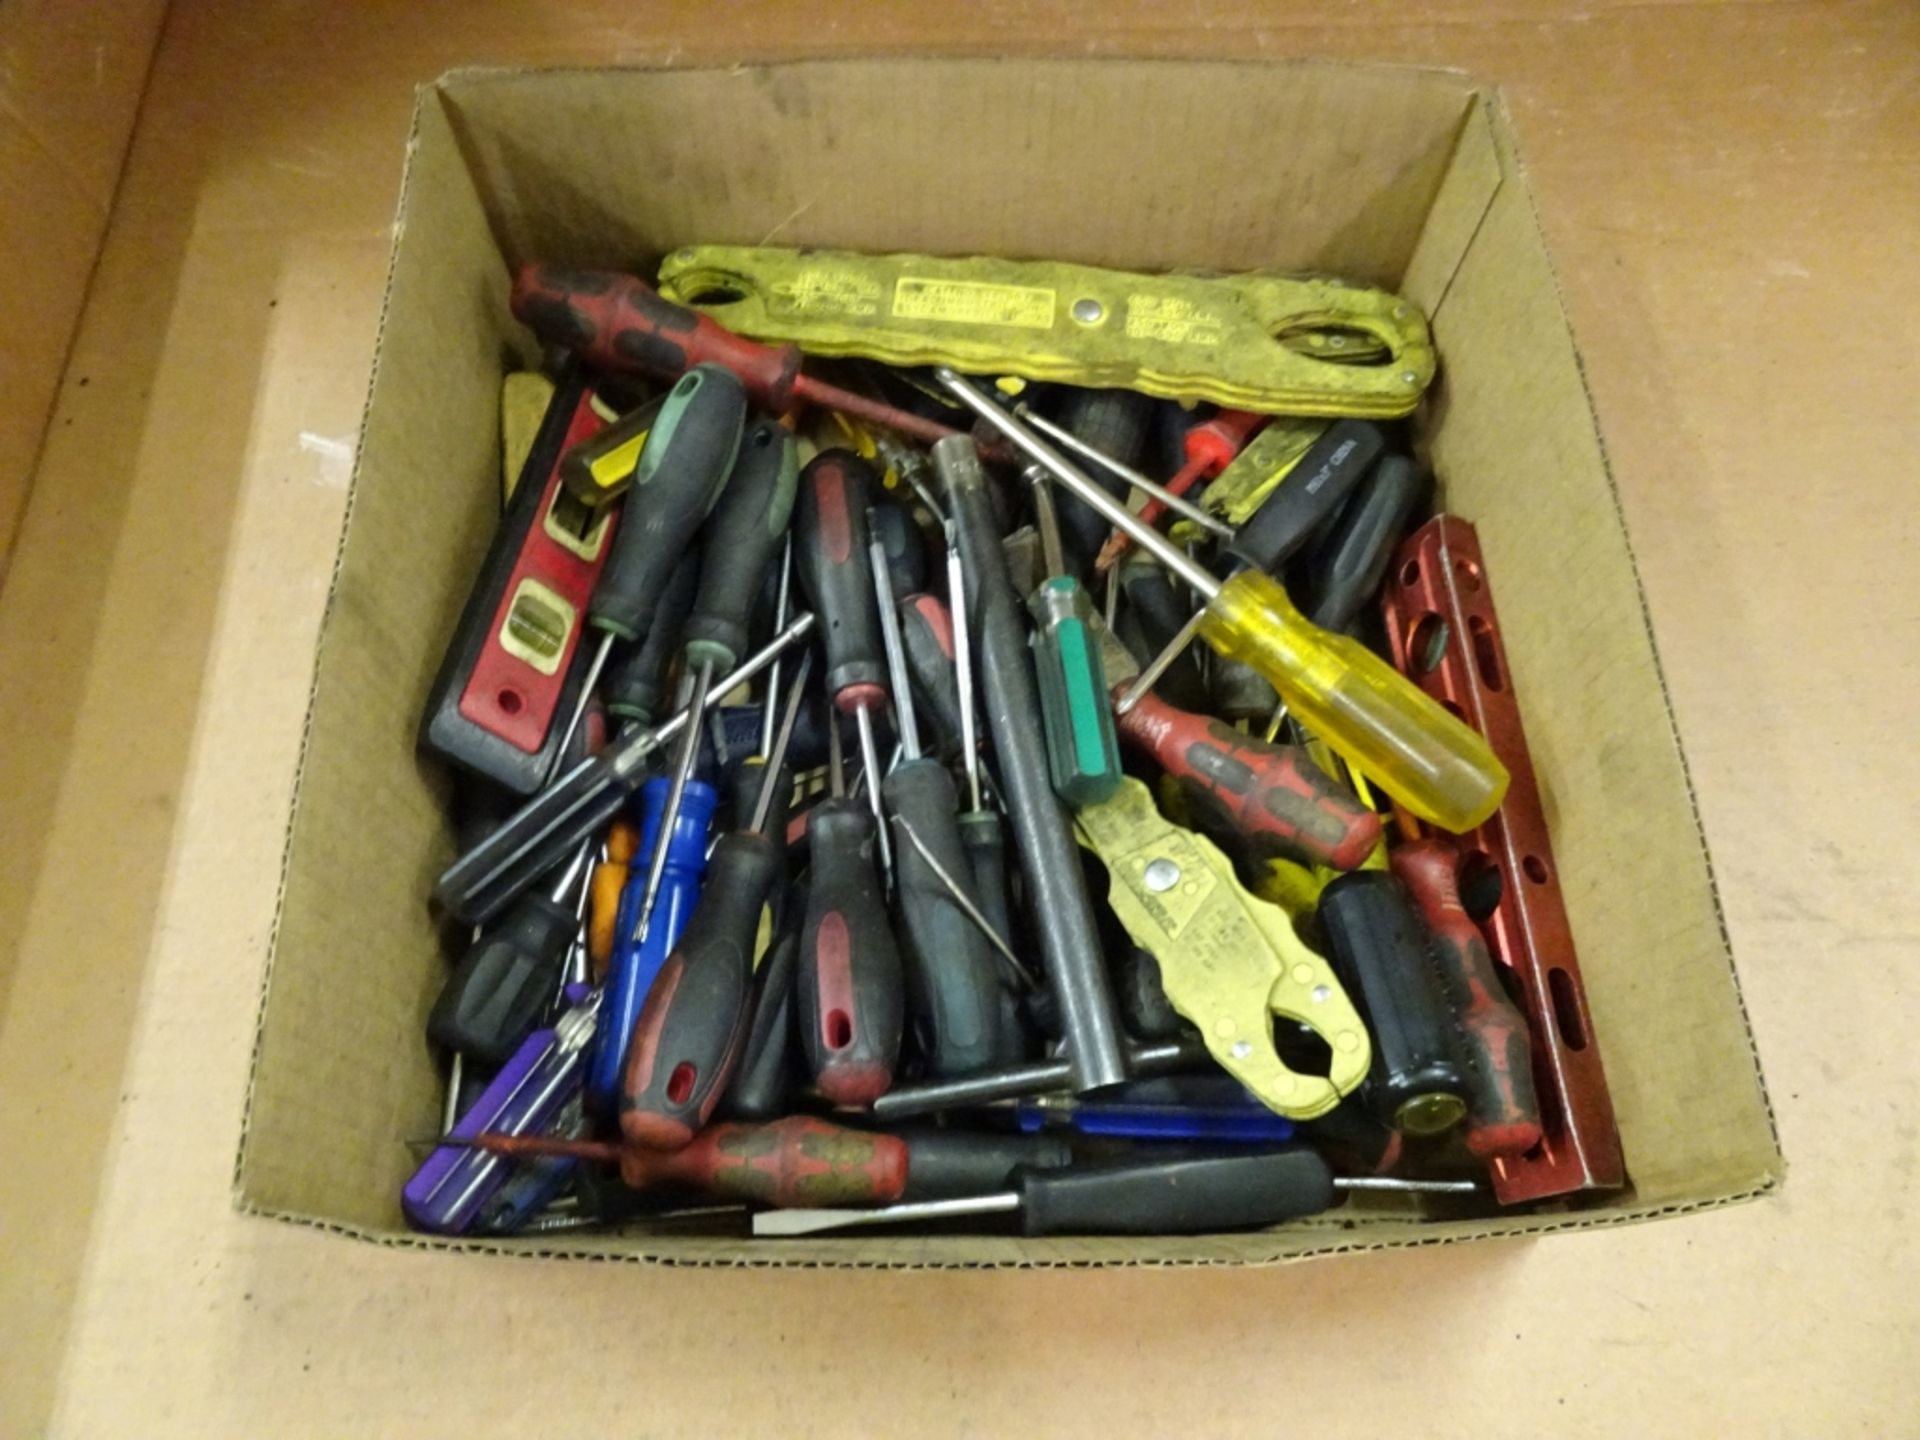 Box Lot Of Various Screw Drivers, Nut Drivers, Fuse Pullers, Levels and Picks - Image 2 of 2